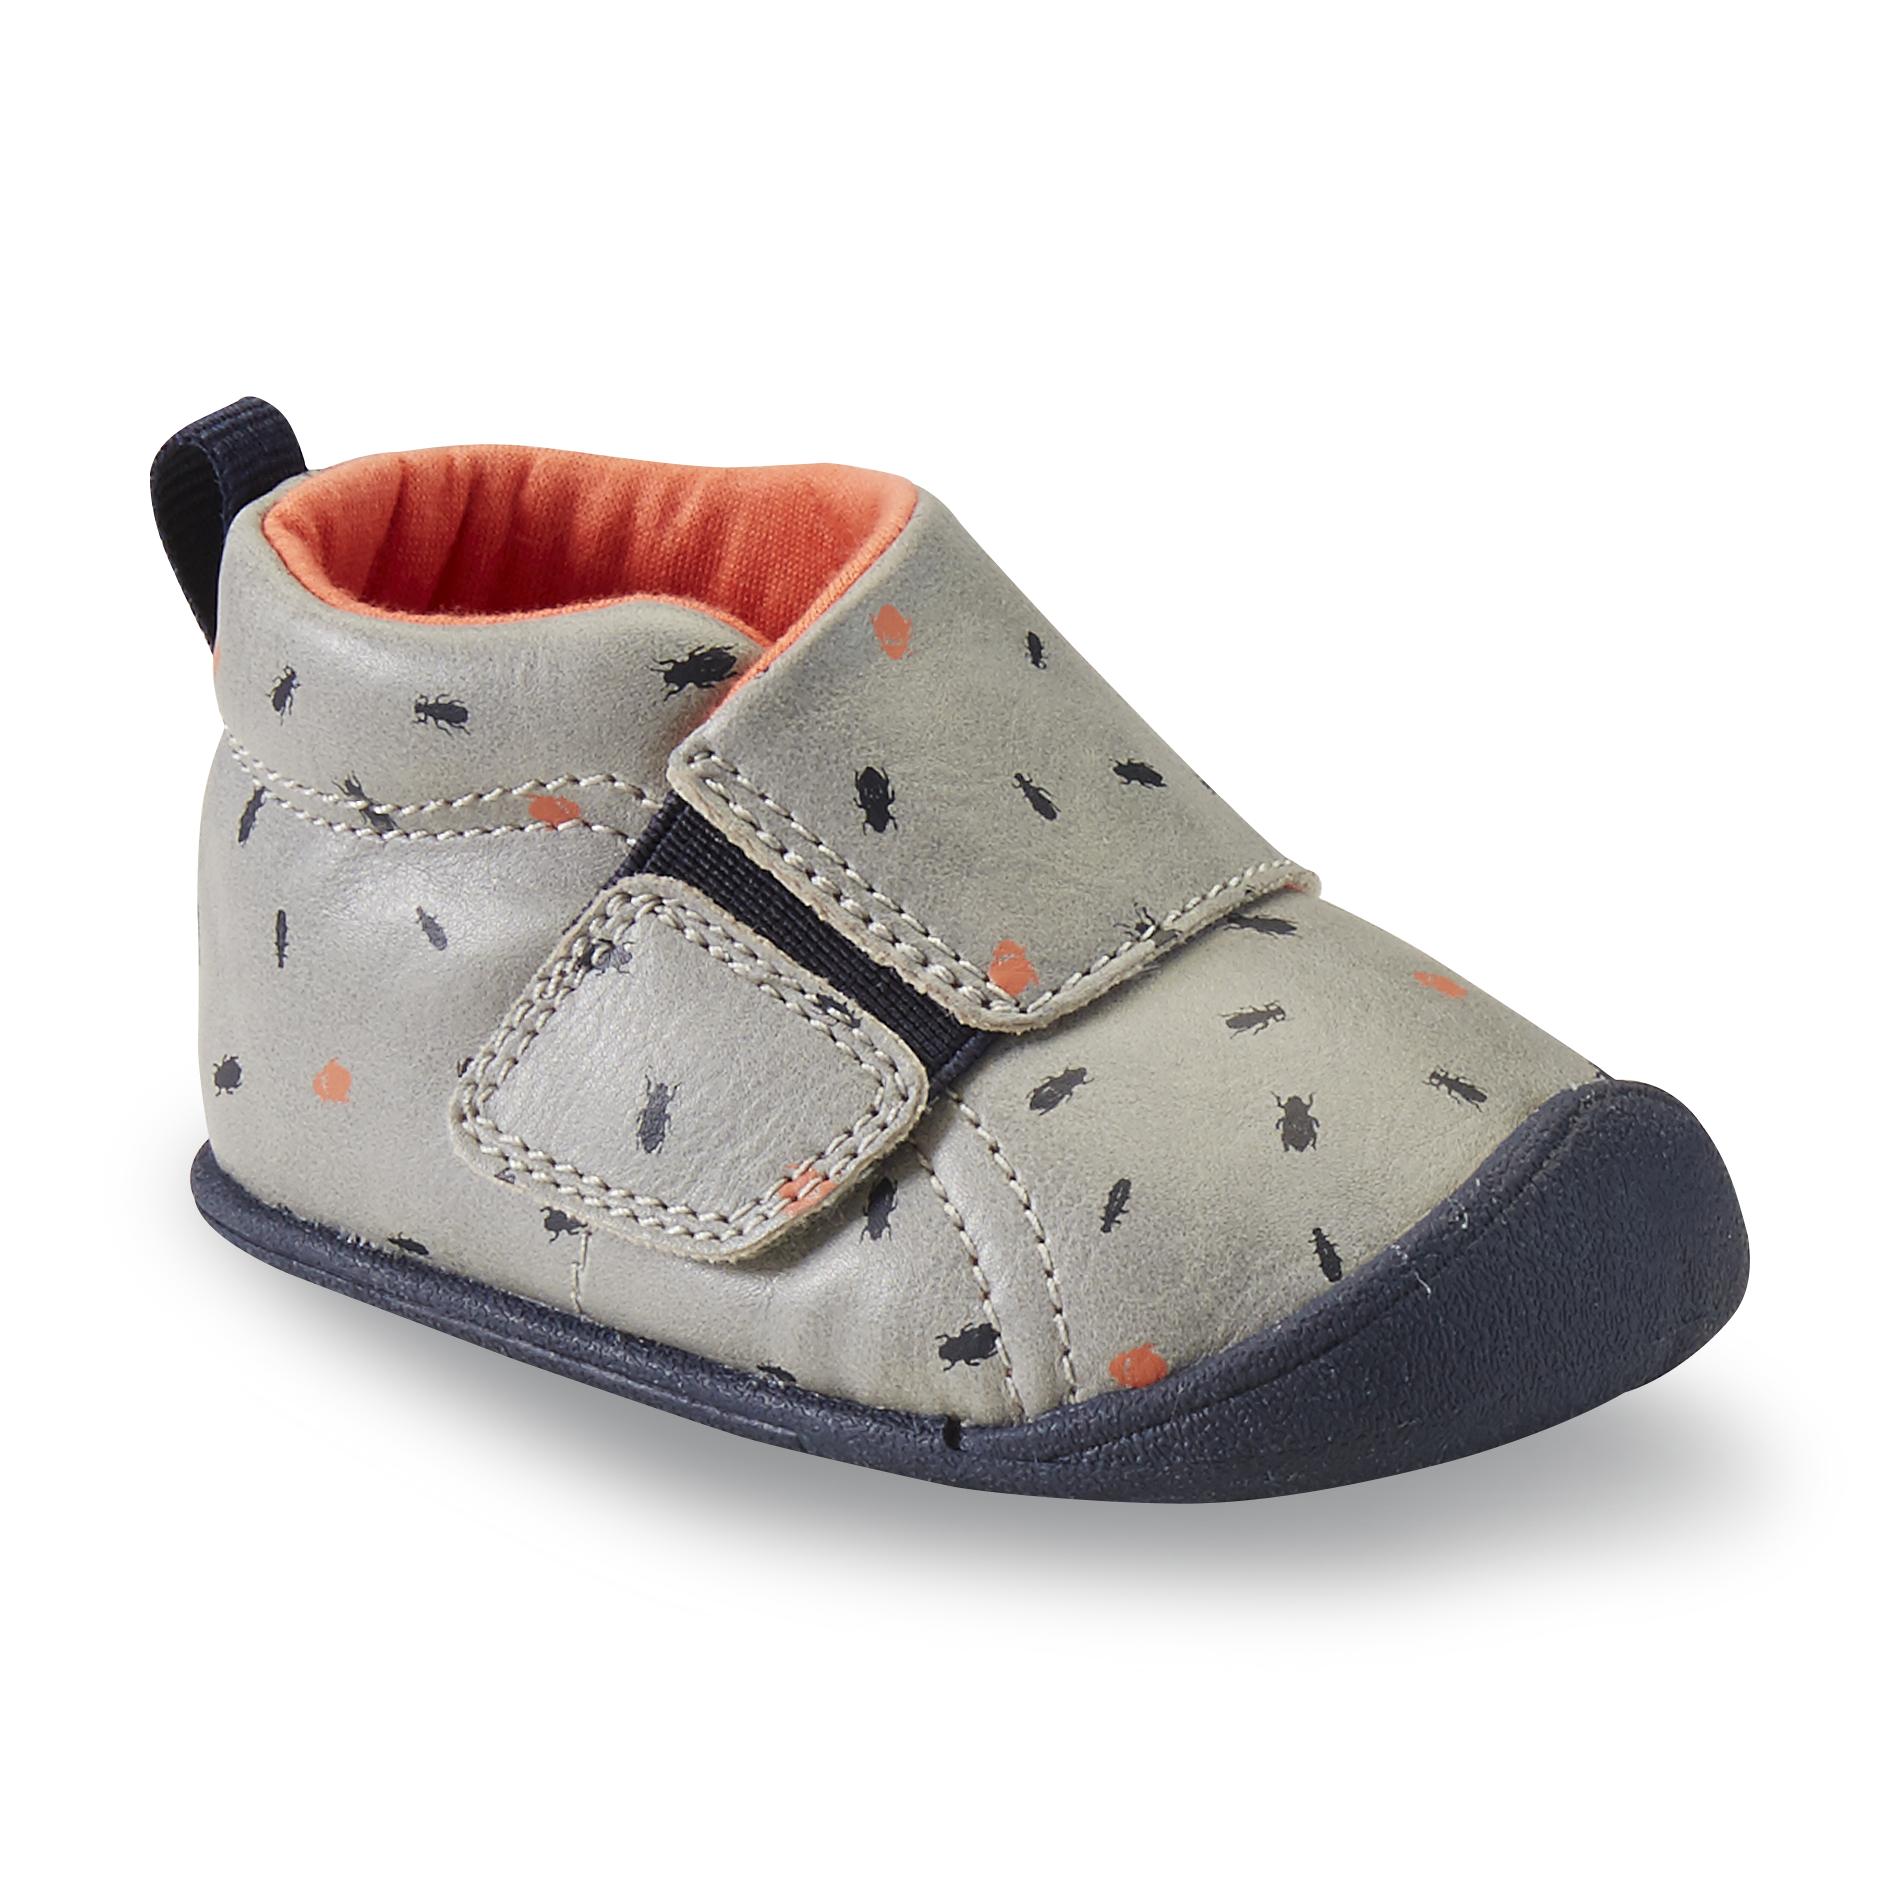 Carter's Every Step Baby Boy's Stage 1 Andy Crawling Shoe - Gray Bug